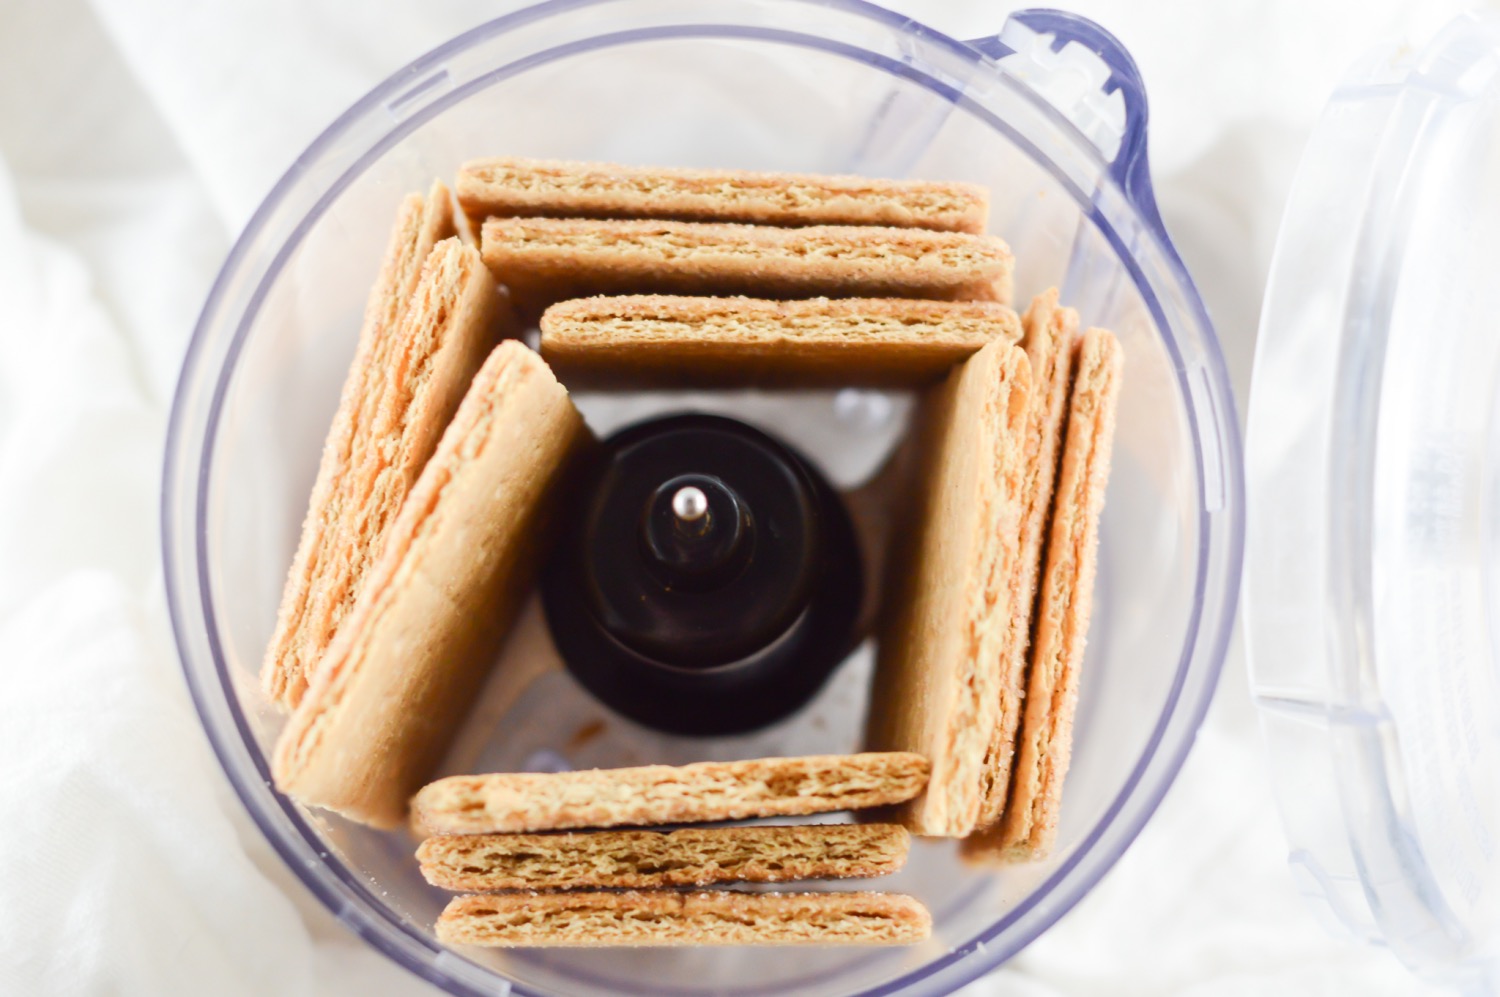 pulse the graham crackers in a food processor